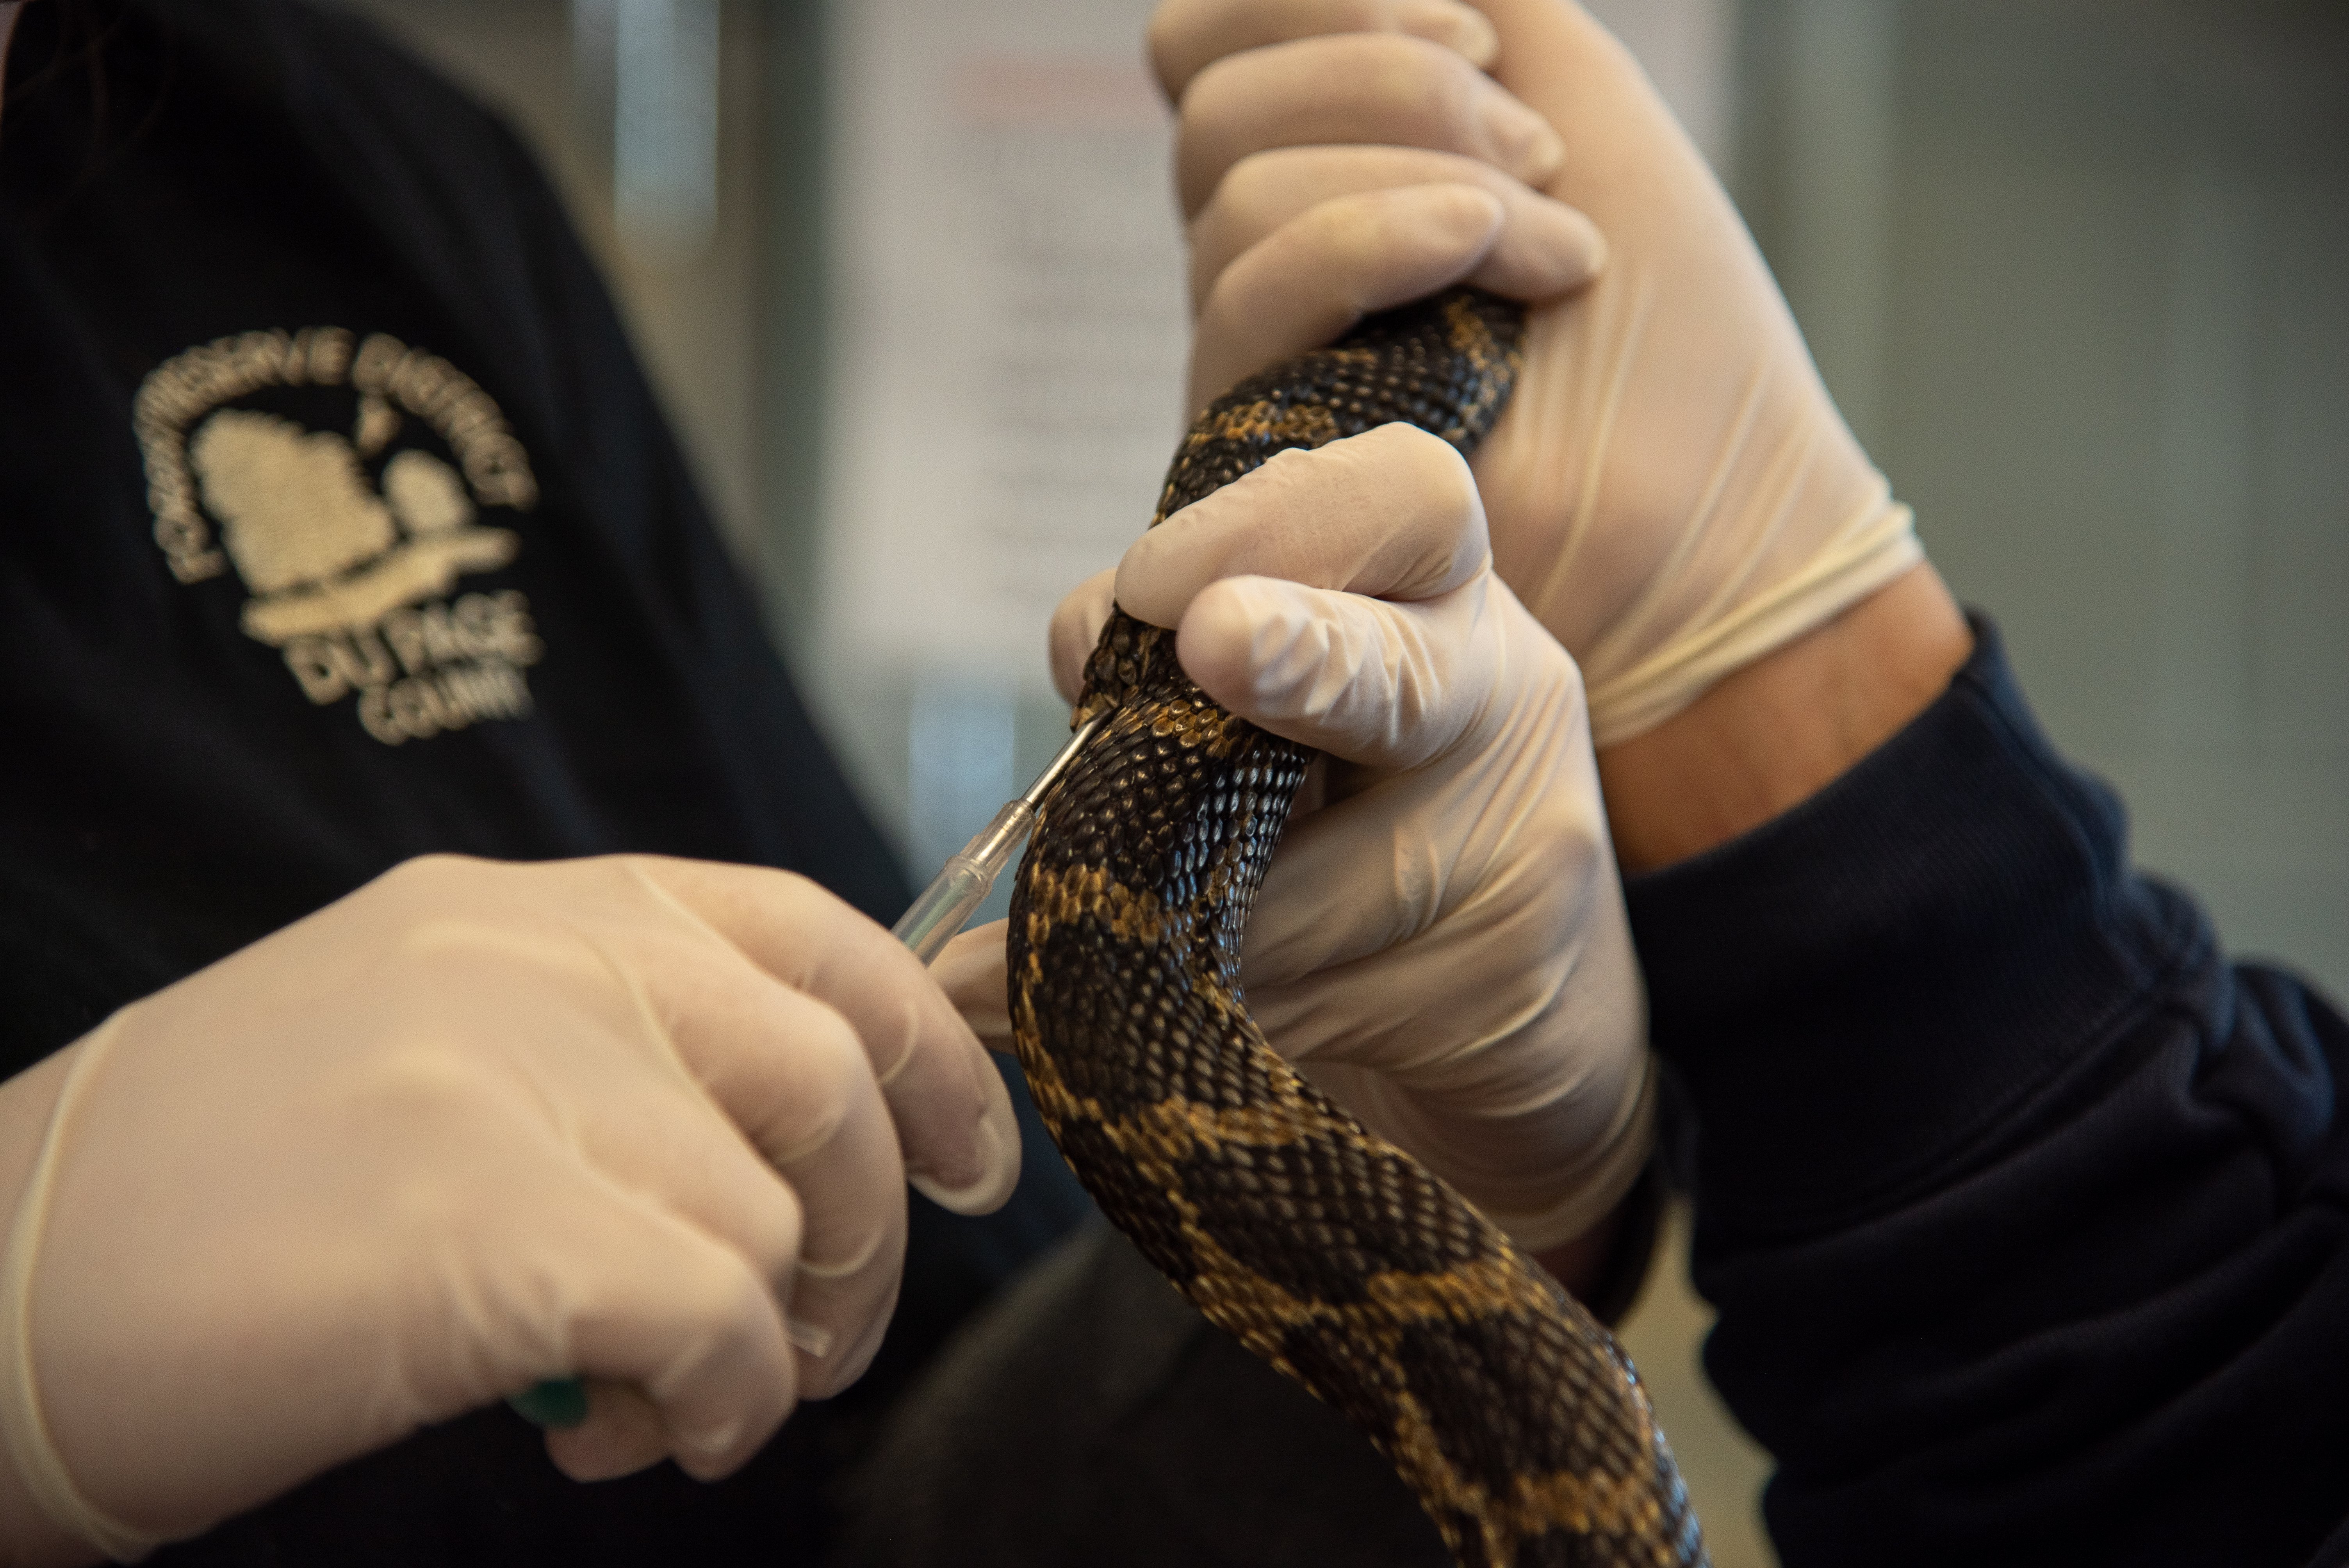 employees treating a snake